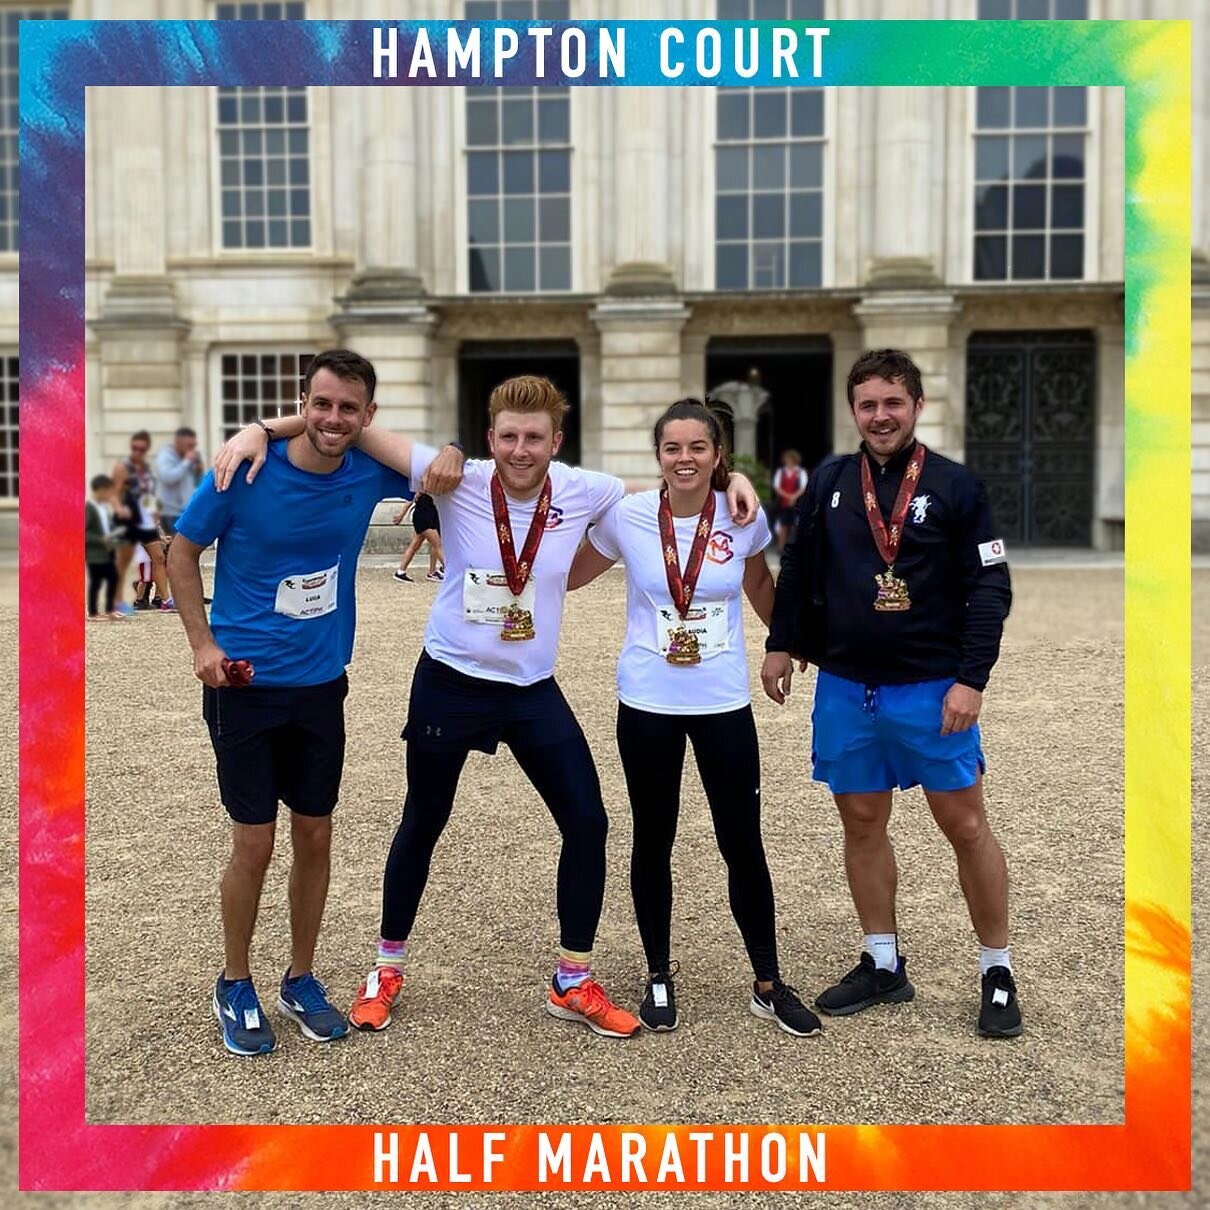 An incredible effort from this lot today, running the @hamptoncourtpalace half marathon to raise awareness and donations for the Si&ocirc;n Mullane Foundation. Well done guys, a tremendous achievement. 🏃&zwj;♀️ 🏃&zwj;♂️ 🏅 

If you would like to do